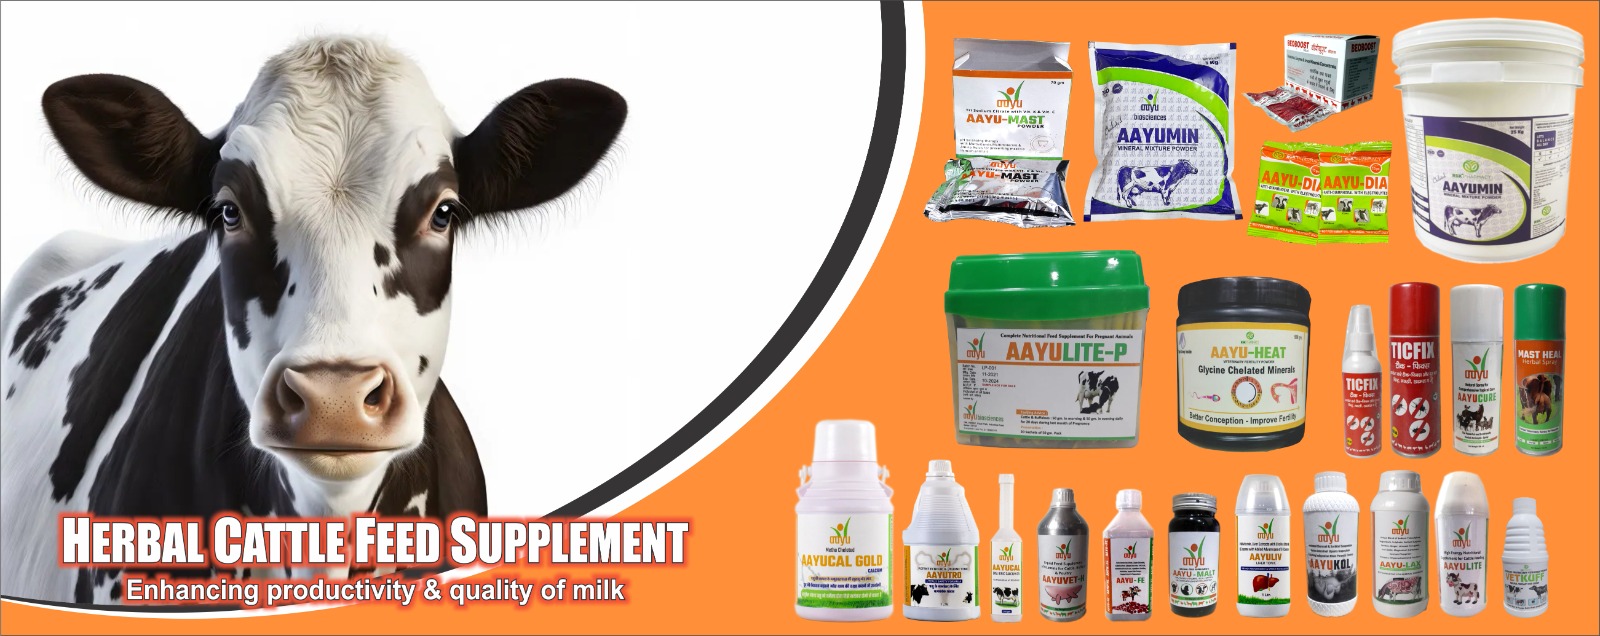 Veterinary Medicine Manufacturing Companies Of in india